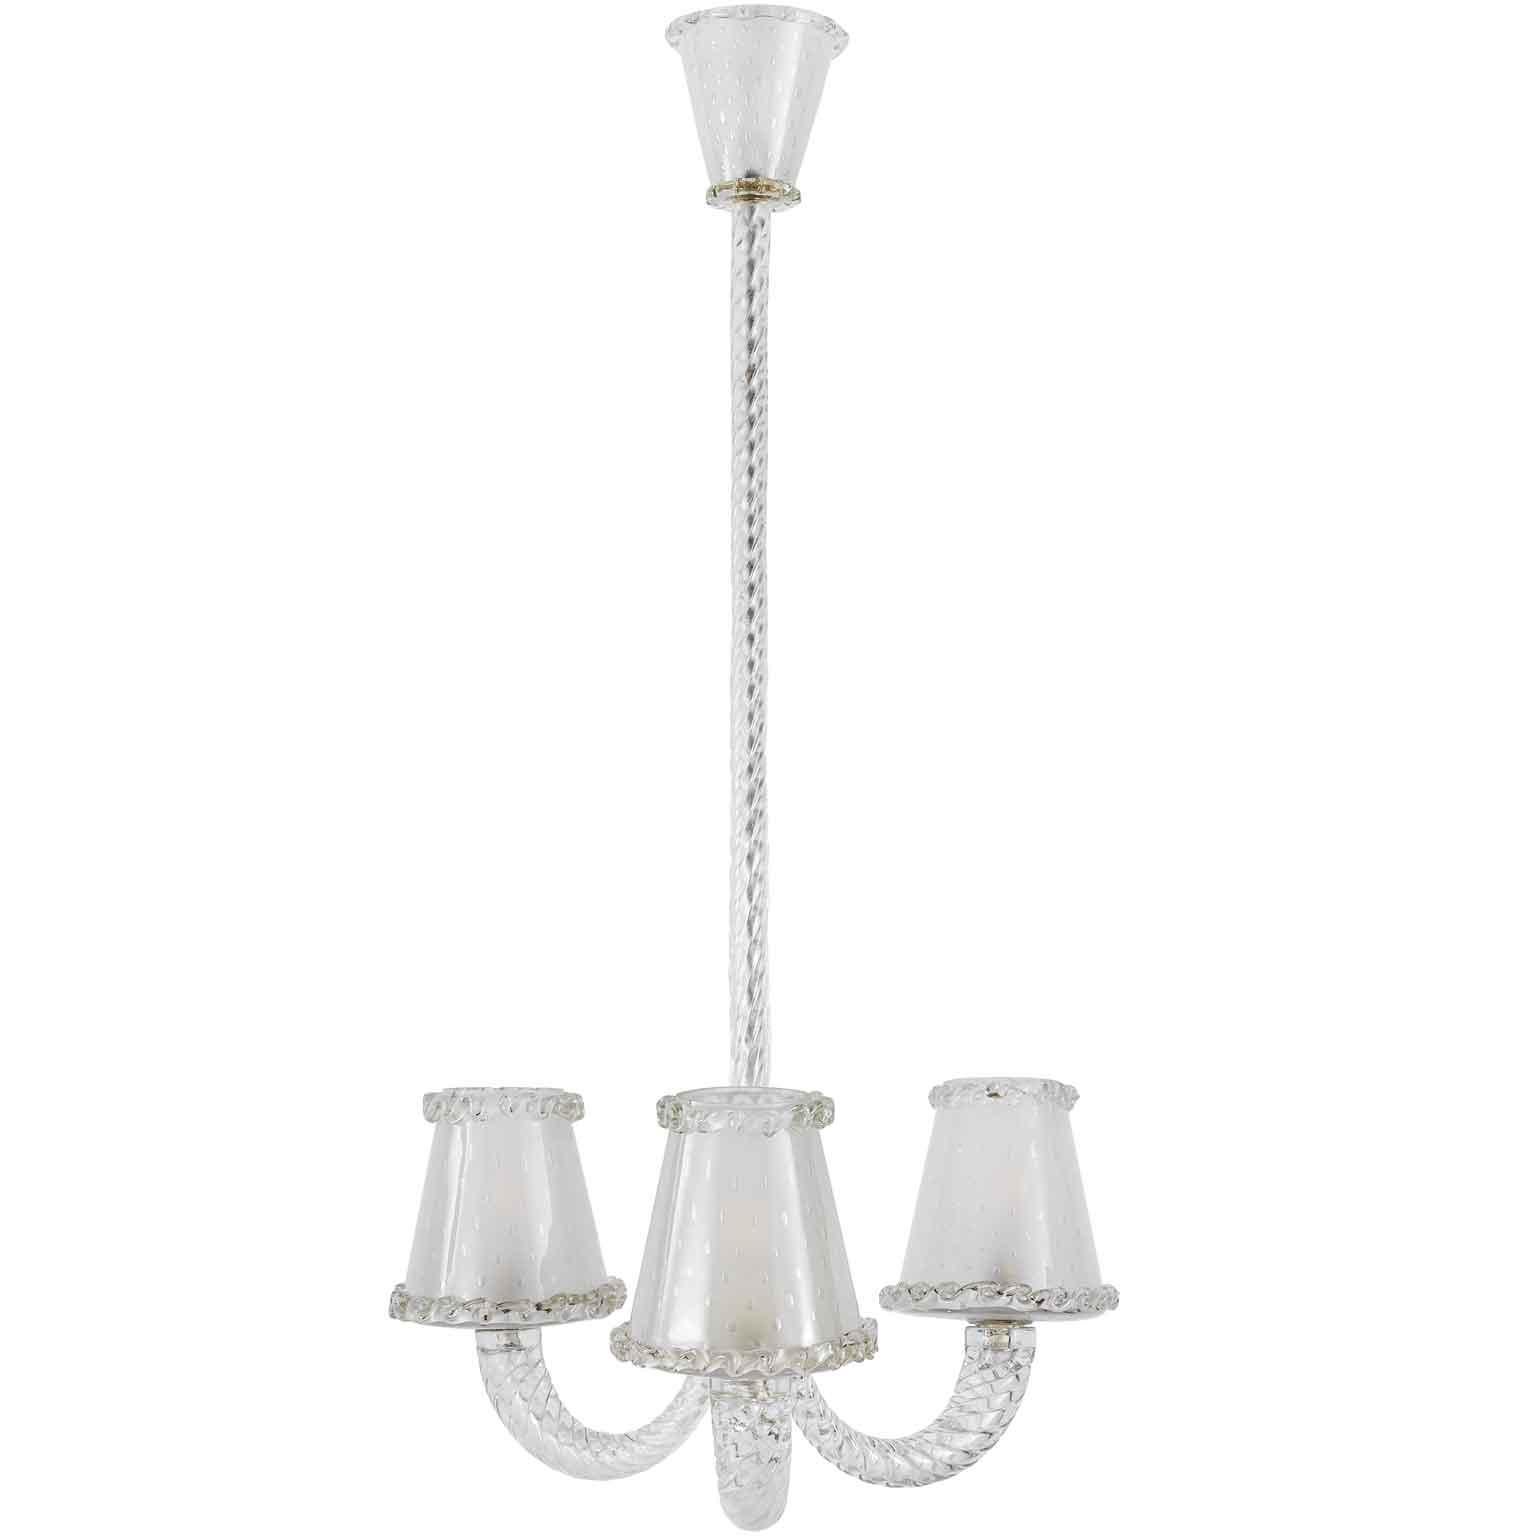 Lovely Italian Venetian Murano glass chandelier, a fashinating Art Deco Barovier Toso style pendant featuring three curved arms ending full form glass shades with applied glass trim, suitable for three light bulbs inside. 
This Venetian blown clear